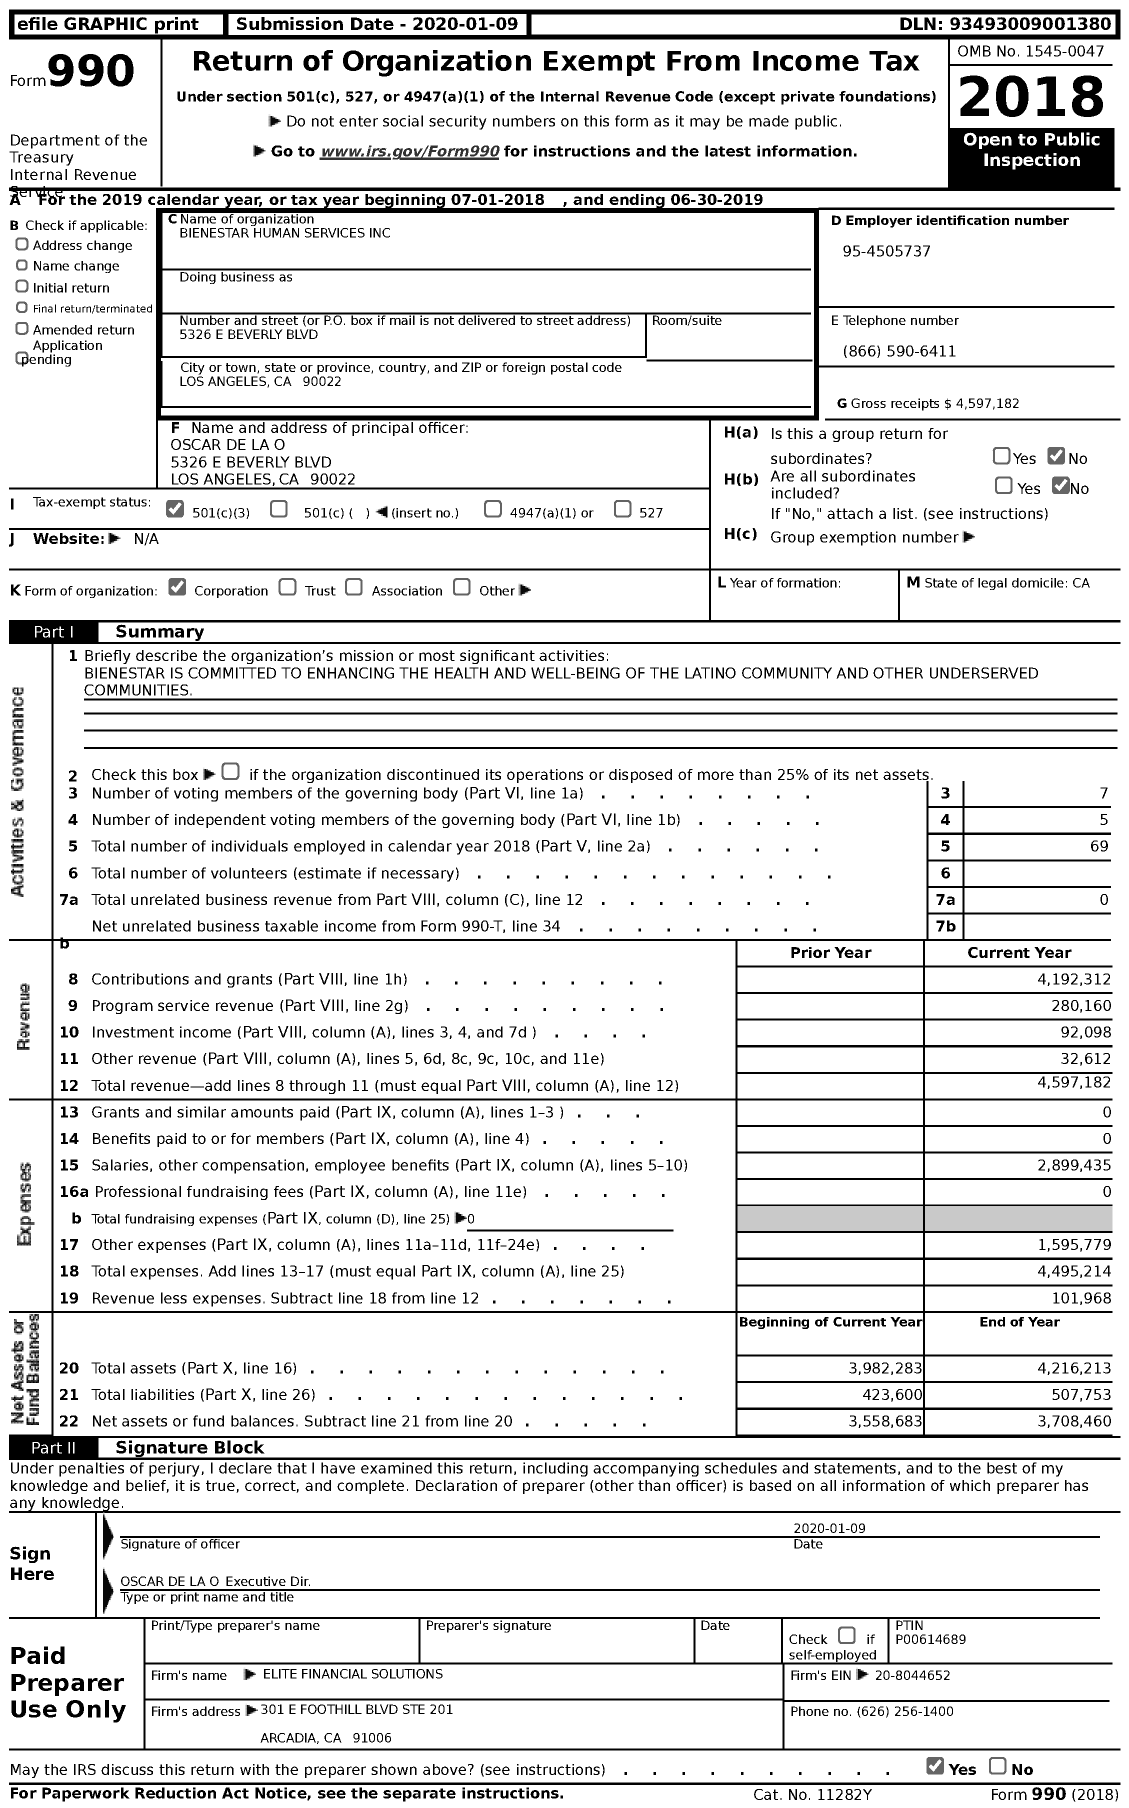 Image of first page of 2018 Form 990 for Bienestar Human Services